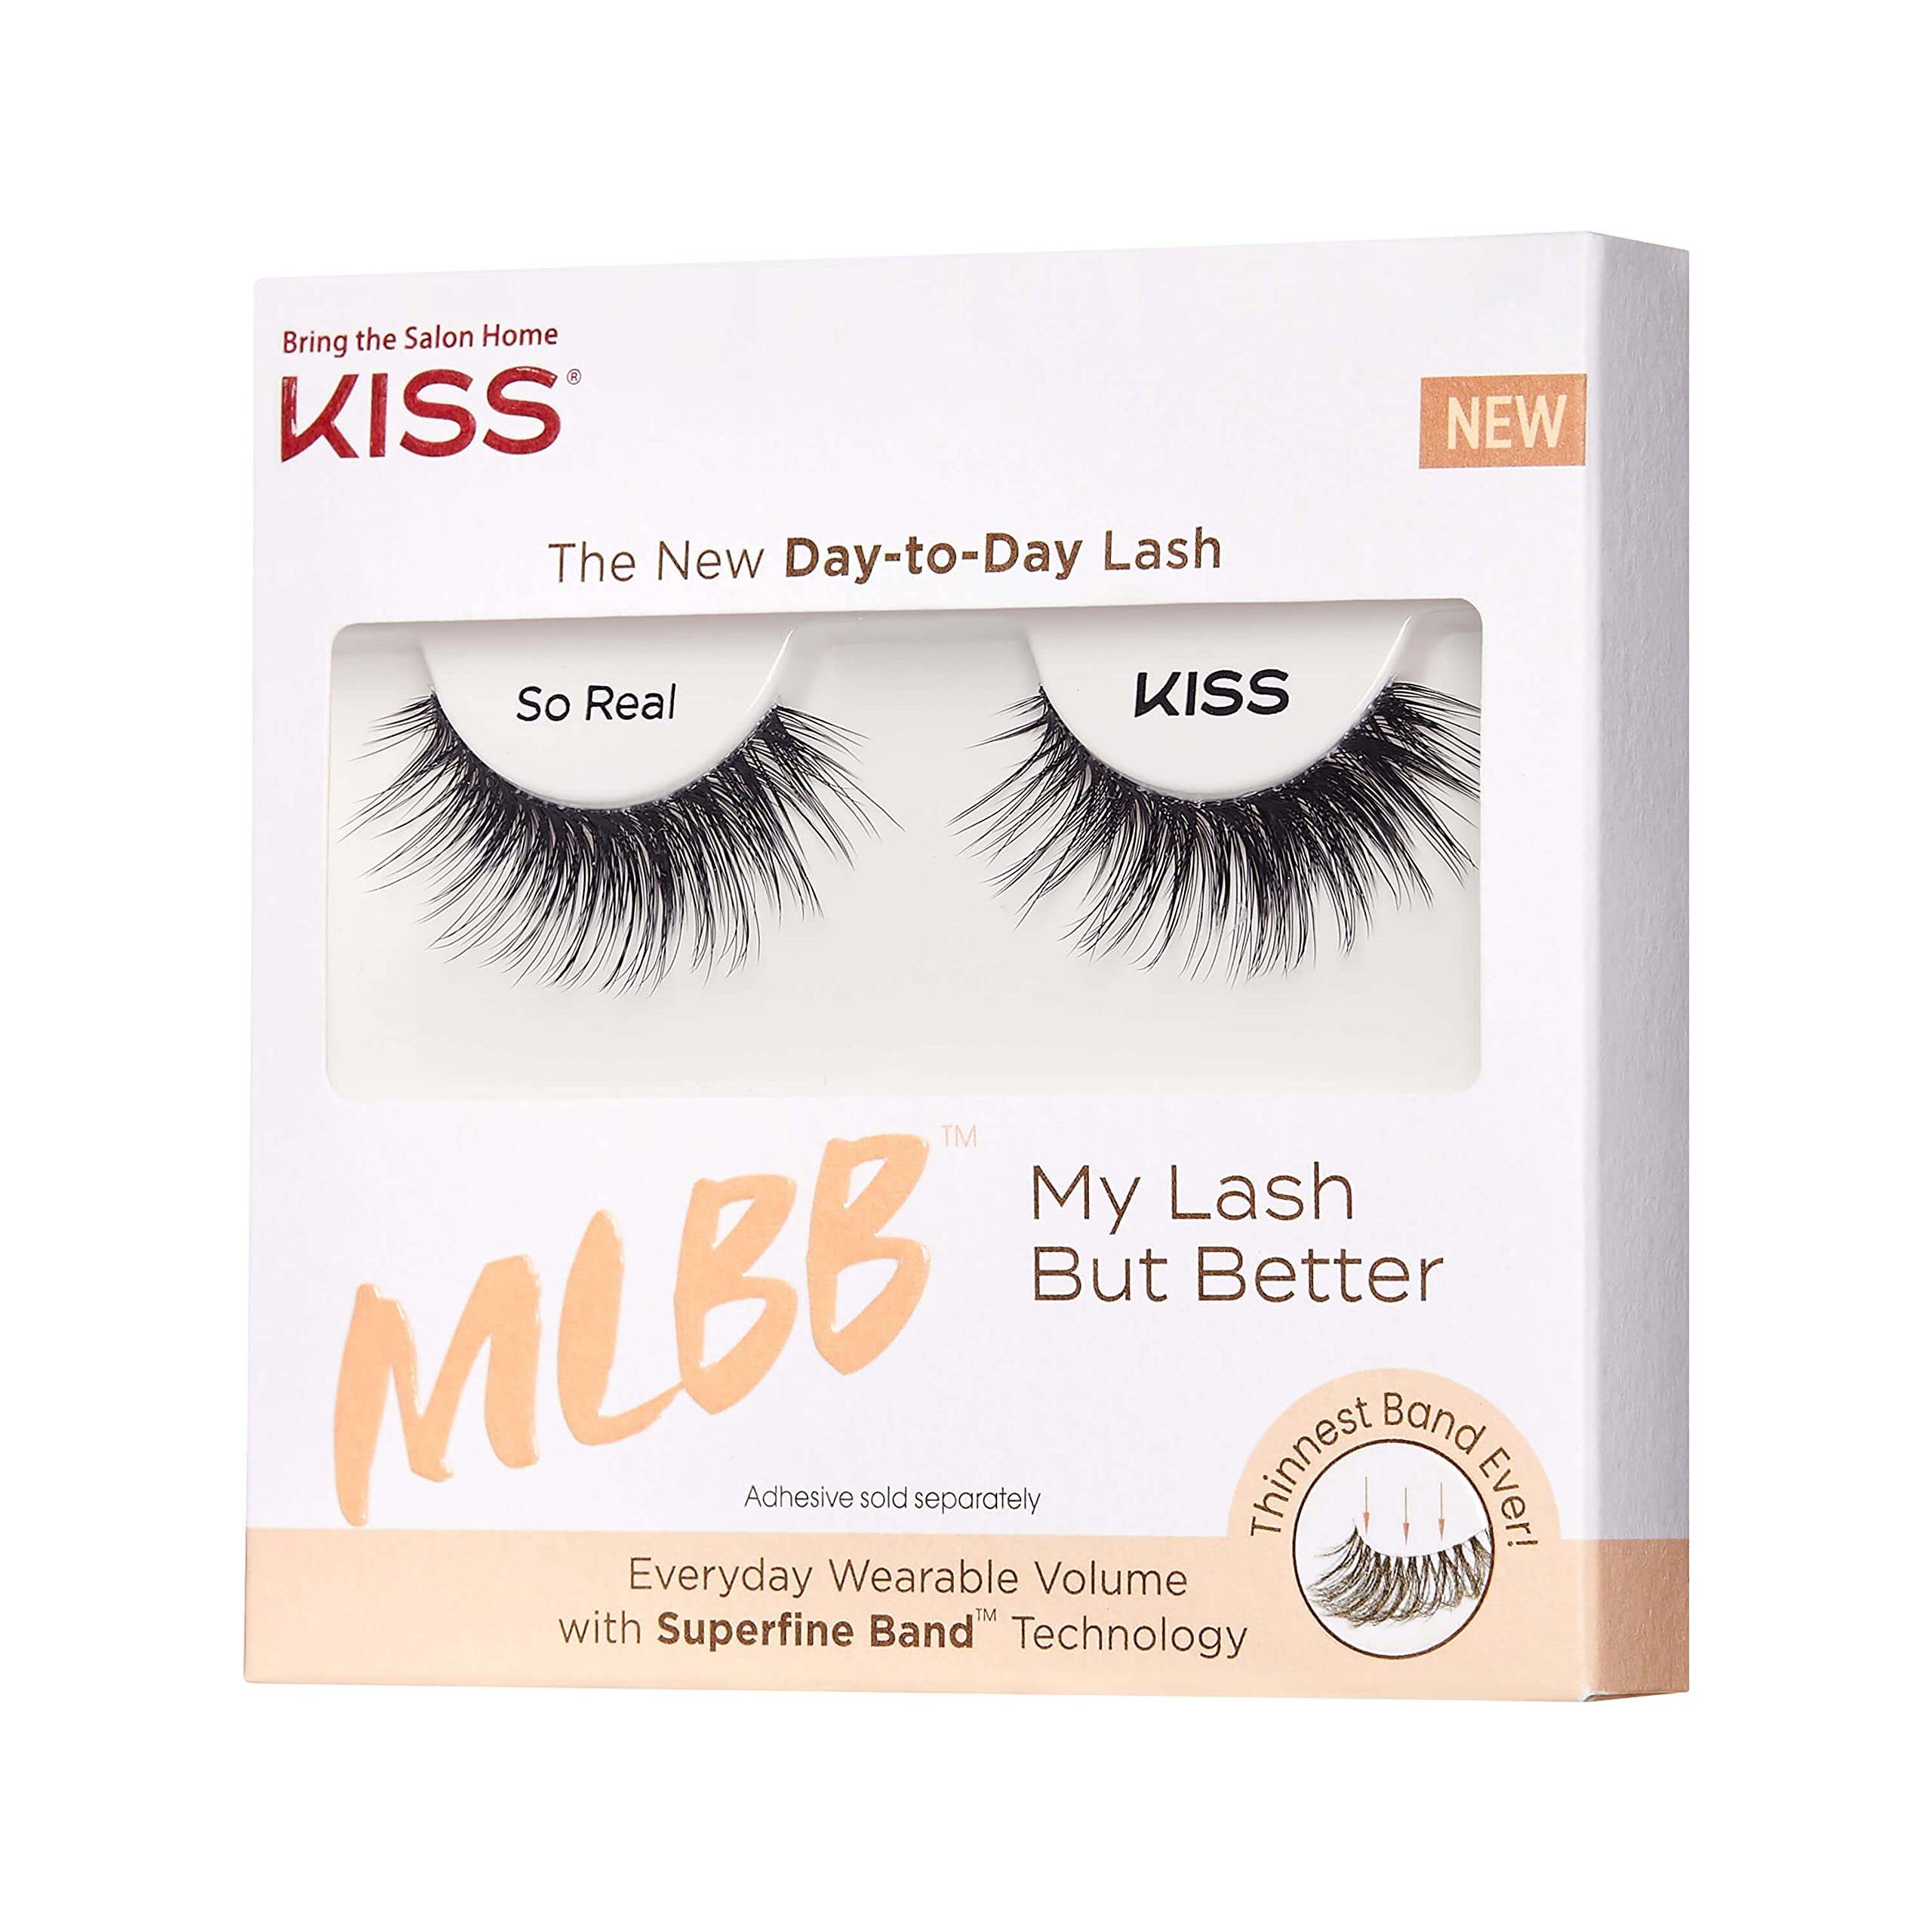 KISS MLBB My Lash But Better False Eyelashes, Everyday Wearable Volume with Superfine Band Technology, Easy To Apply, Reusable, Cruelty-Free, Contact Lens Friendly, Style 'So Real', 1 Pair Fake Eyelashes